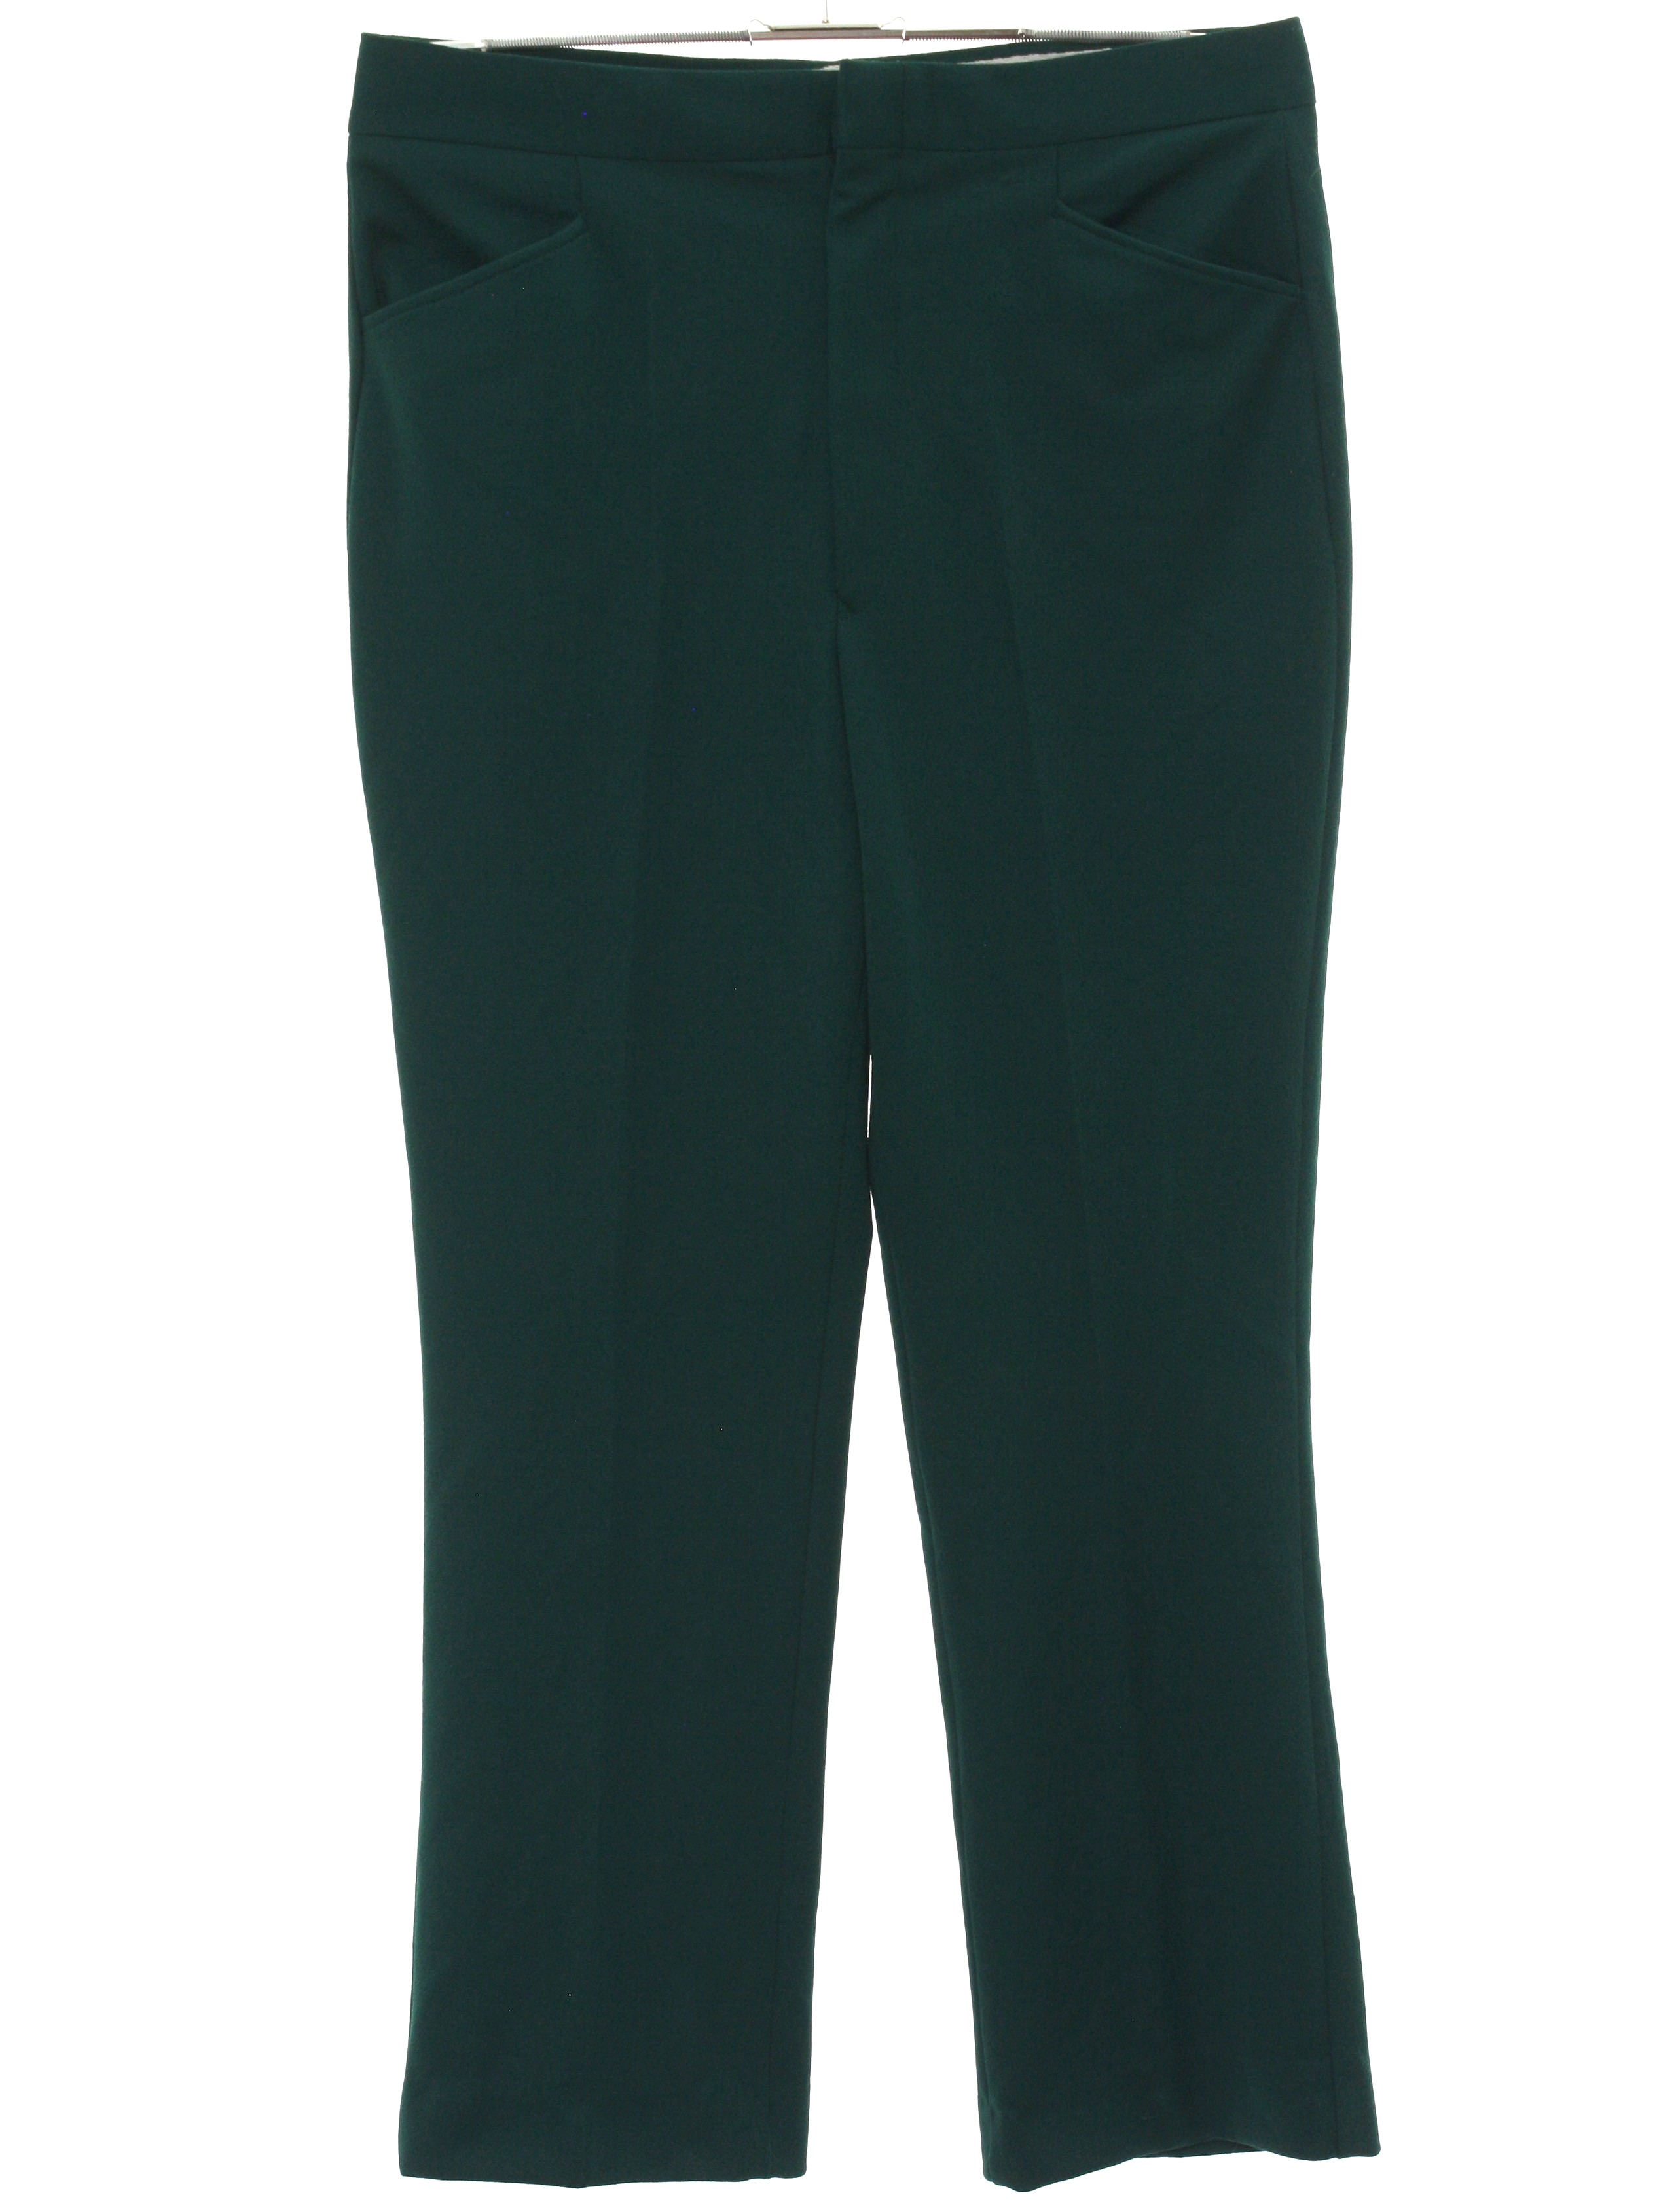 1970s Sears Pants: 70s -Sears- Mens hunter green polyester knit loose ...